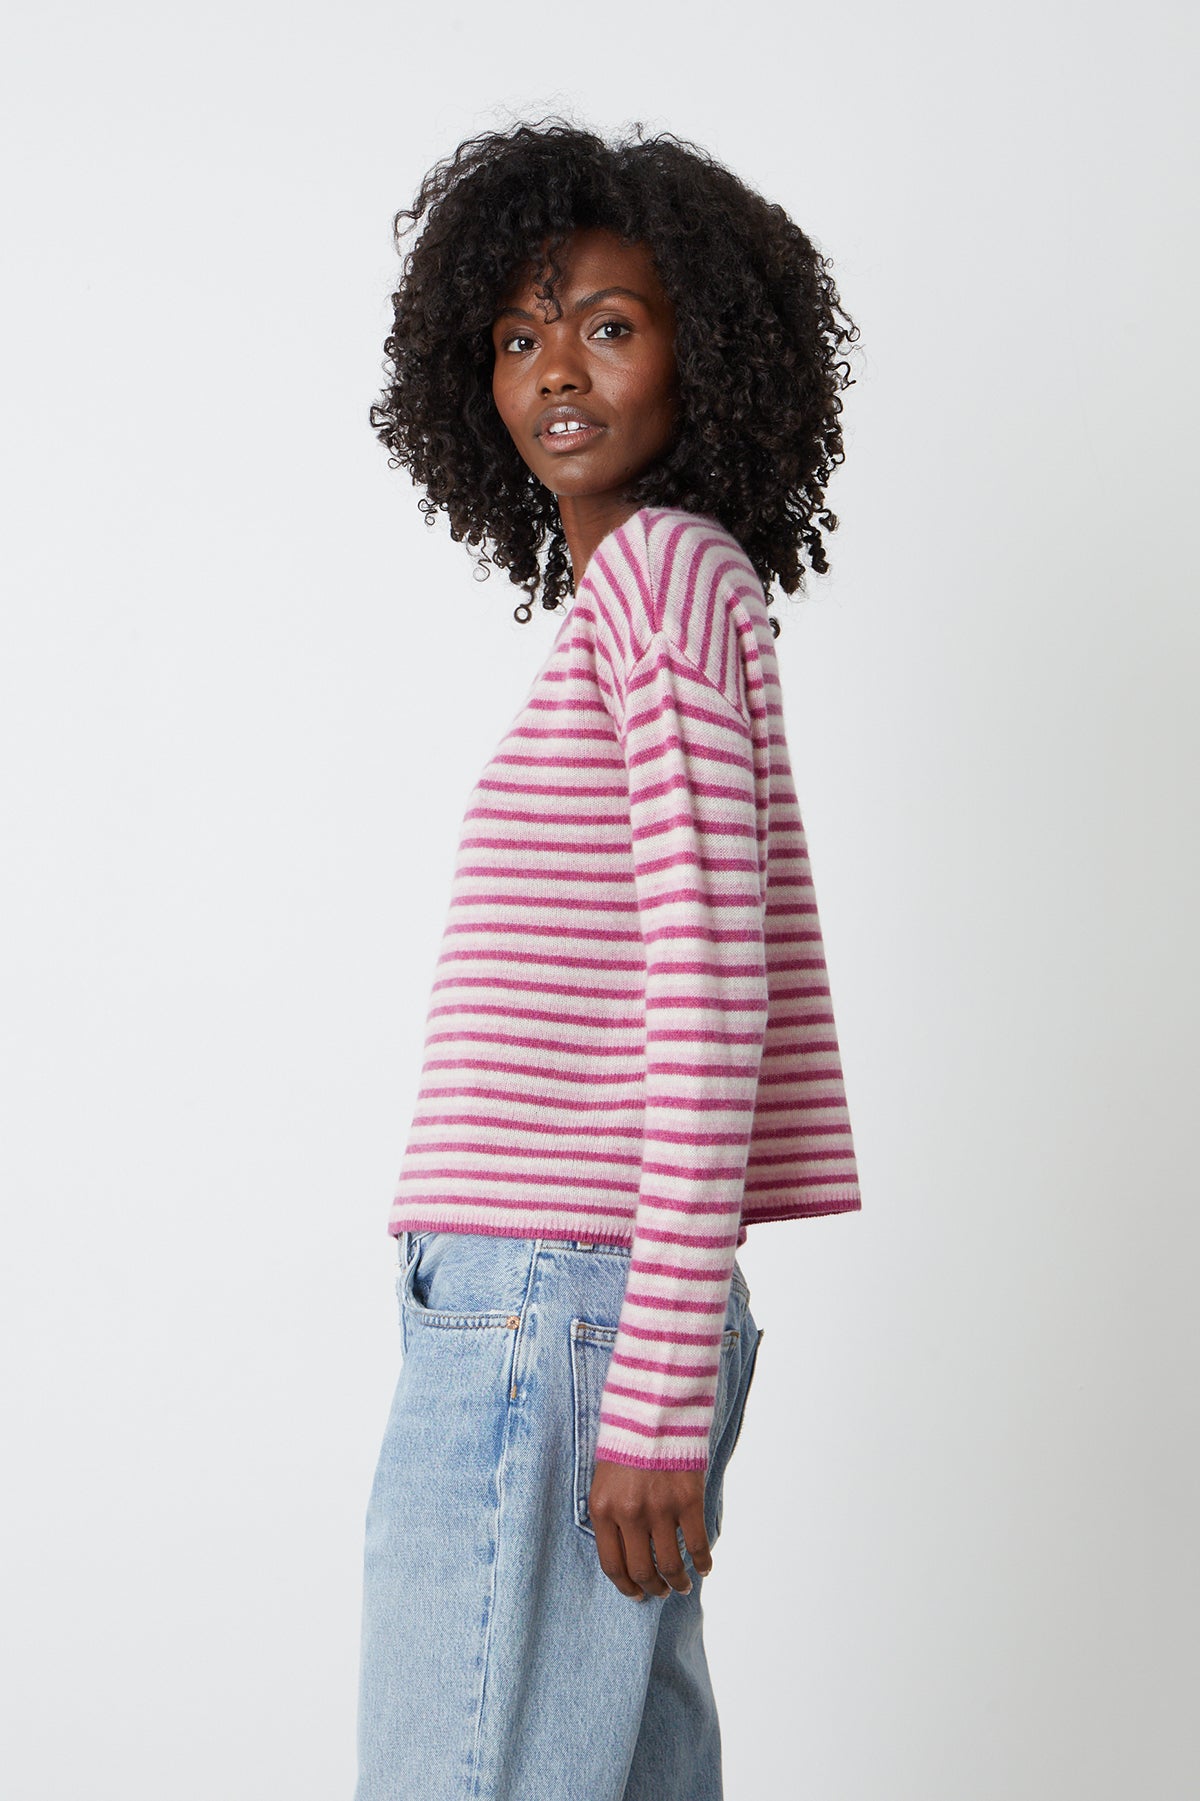 The model is wearing a Velvet by Graham & Spencer CADIE CASHMERE STRIPED SWEATER and jeans.-25870939717825